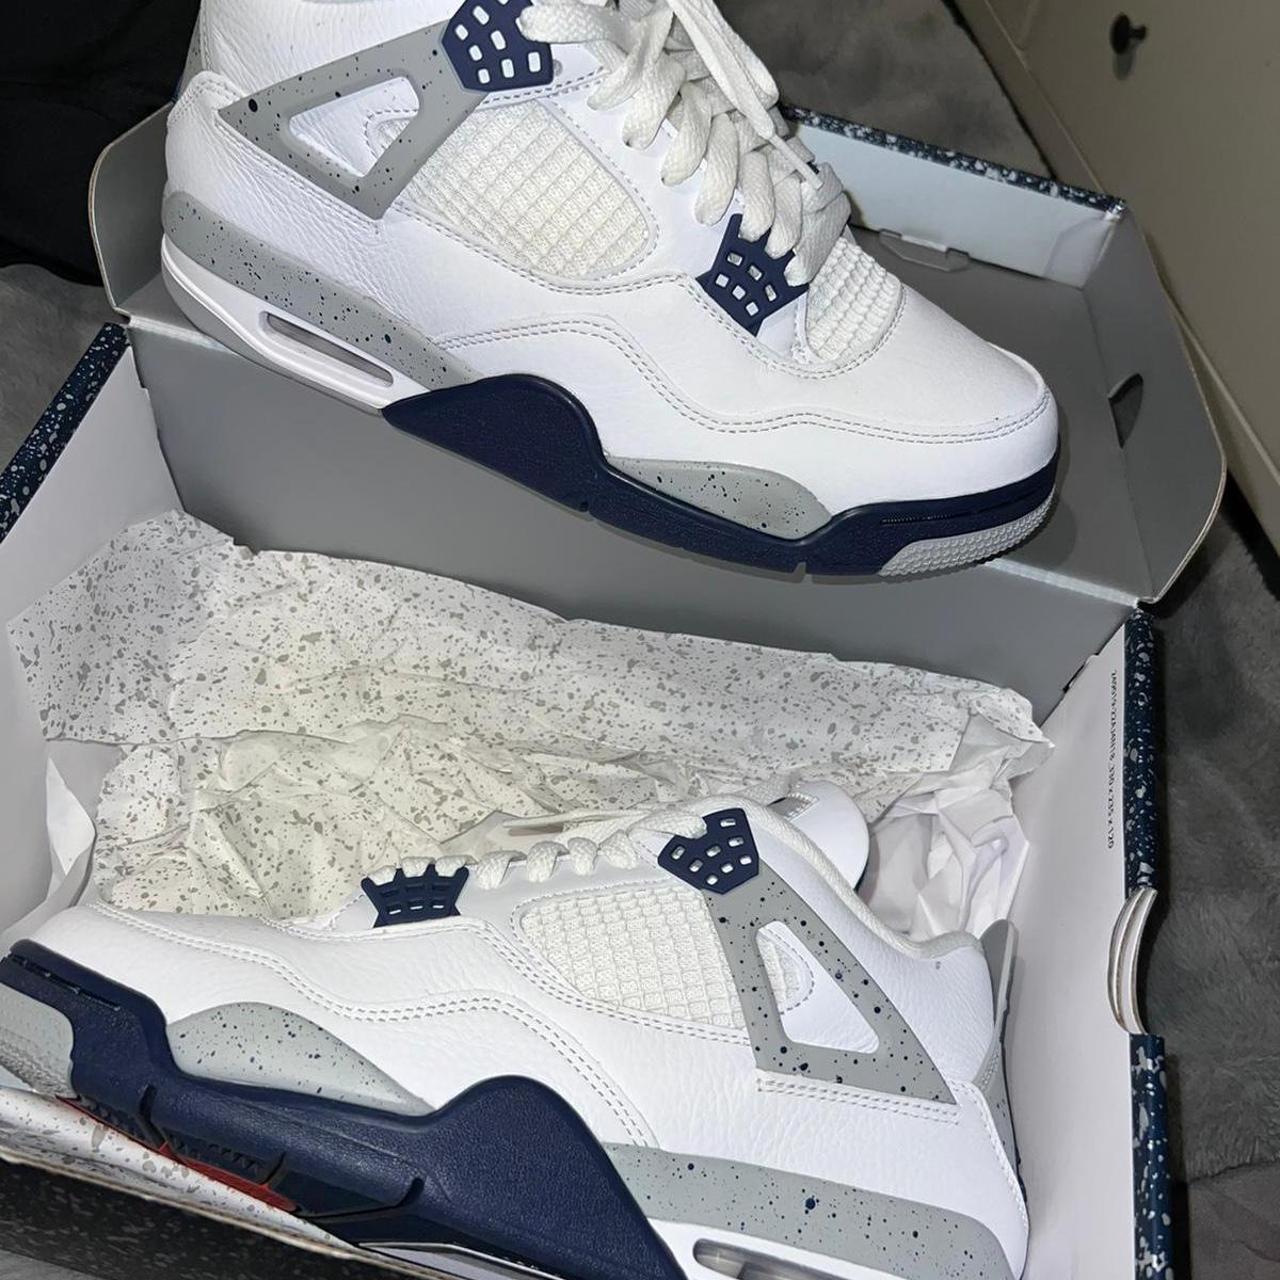 Jordan 4 midnight navy Size 8 Worn to for about an... - Depop